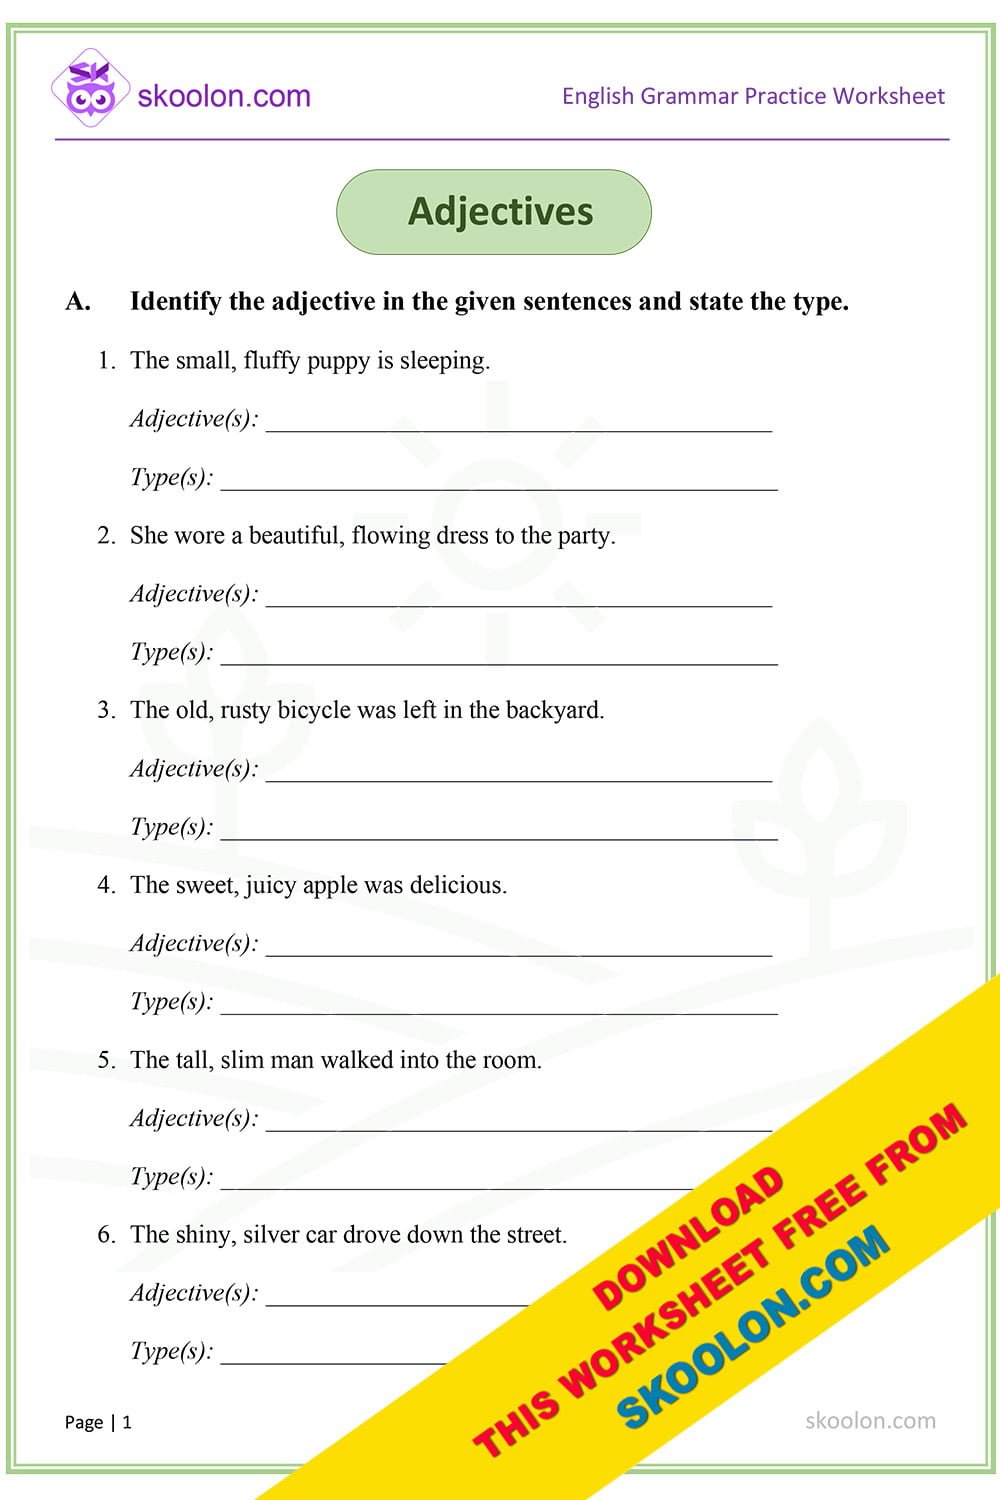 personality-adjectives-adjective-worksheet-personality-adjectives-adjectives-to-describe